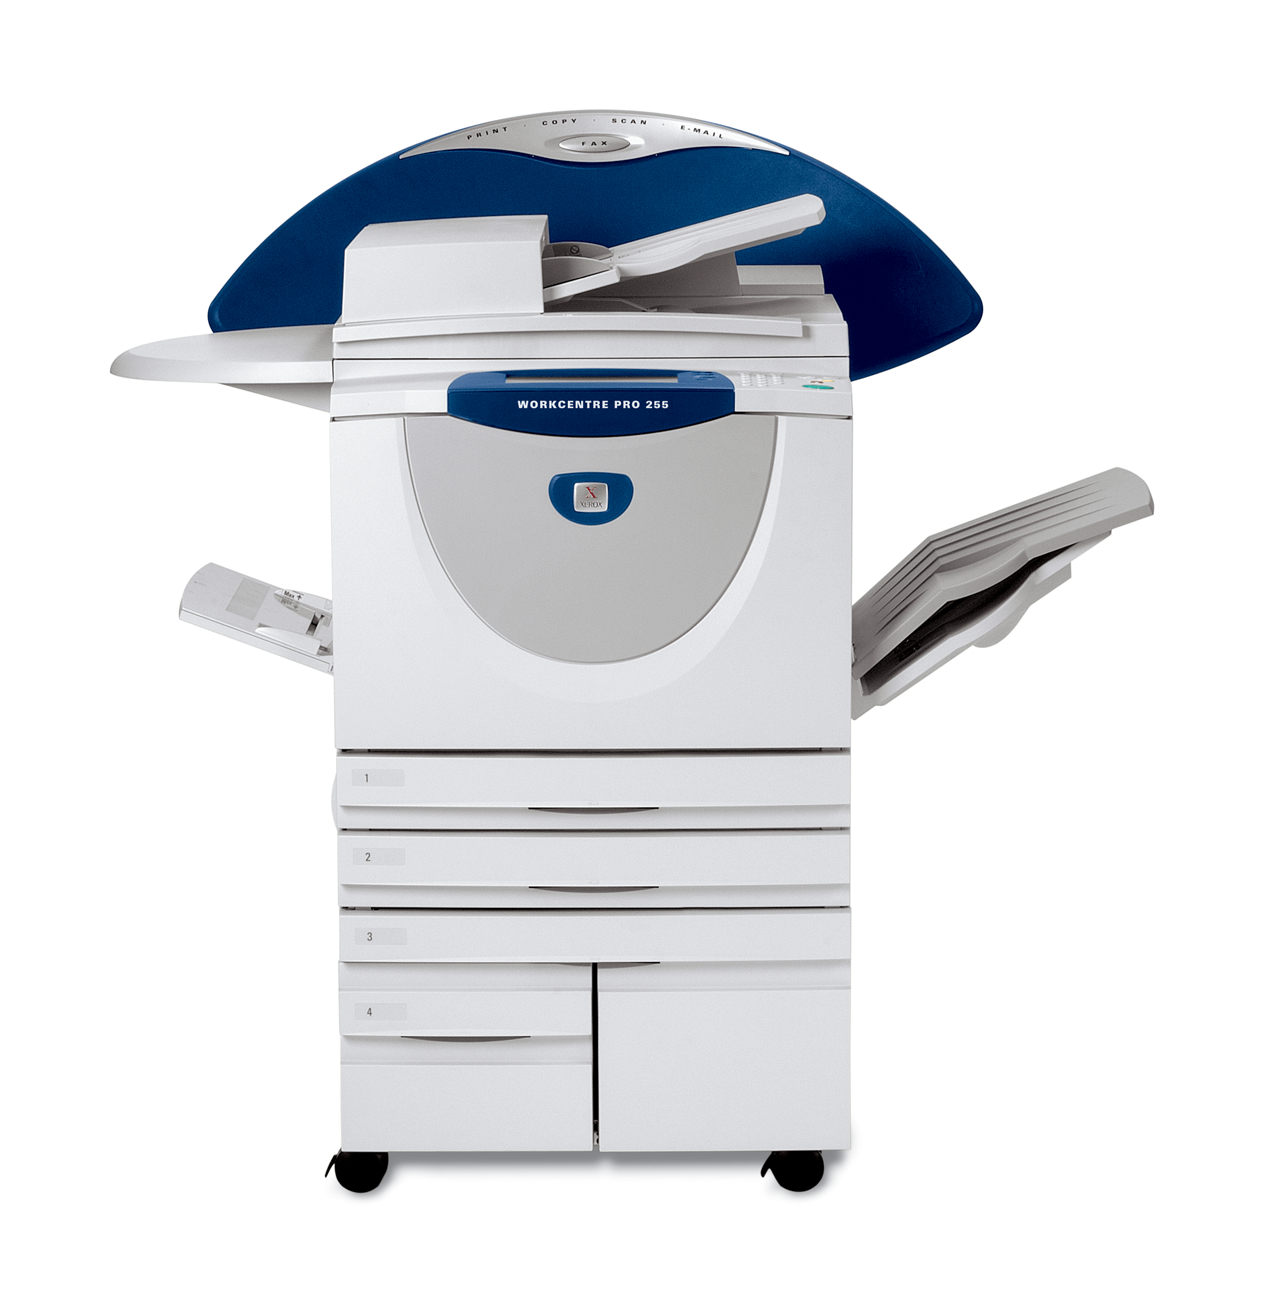 The WorkCentre Pro 245 is an advanced multifunction printer with a speed of  up to 45 pages per minute. This device offers print, copy, scan, fax and  email capabilities. It's a true